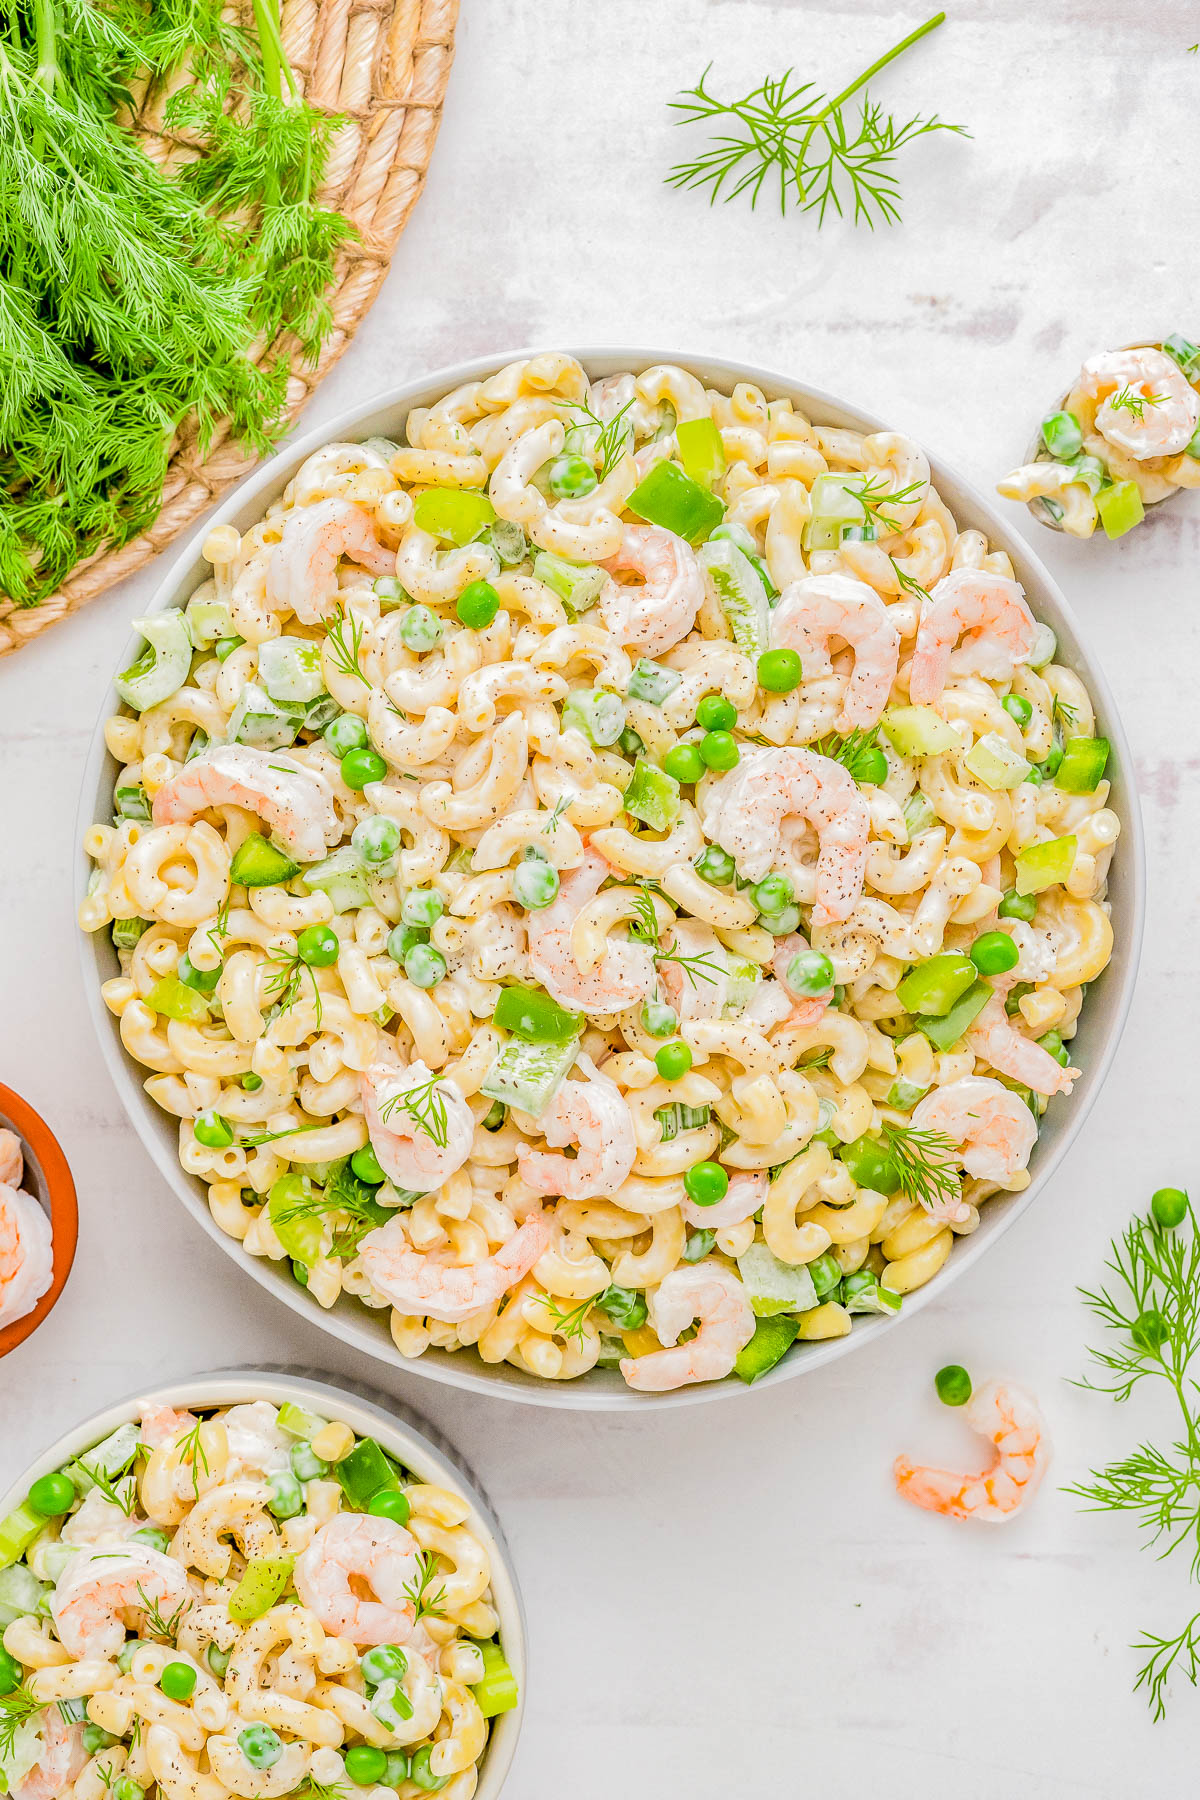 A colorful shrimp pasta salad with green peas, chopped celery, and dill, served in a large white bowl, garnished with fresh herbs.